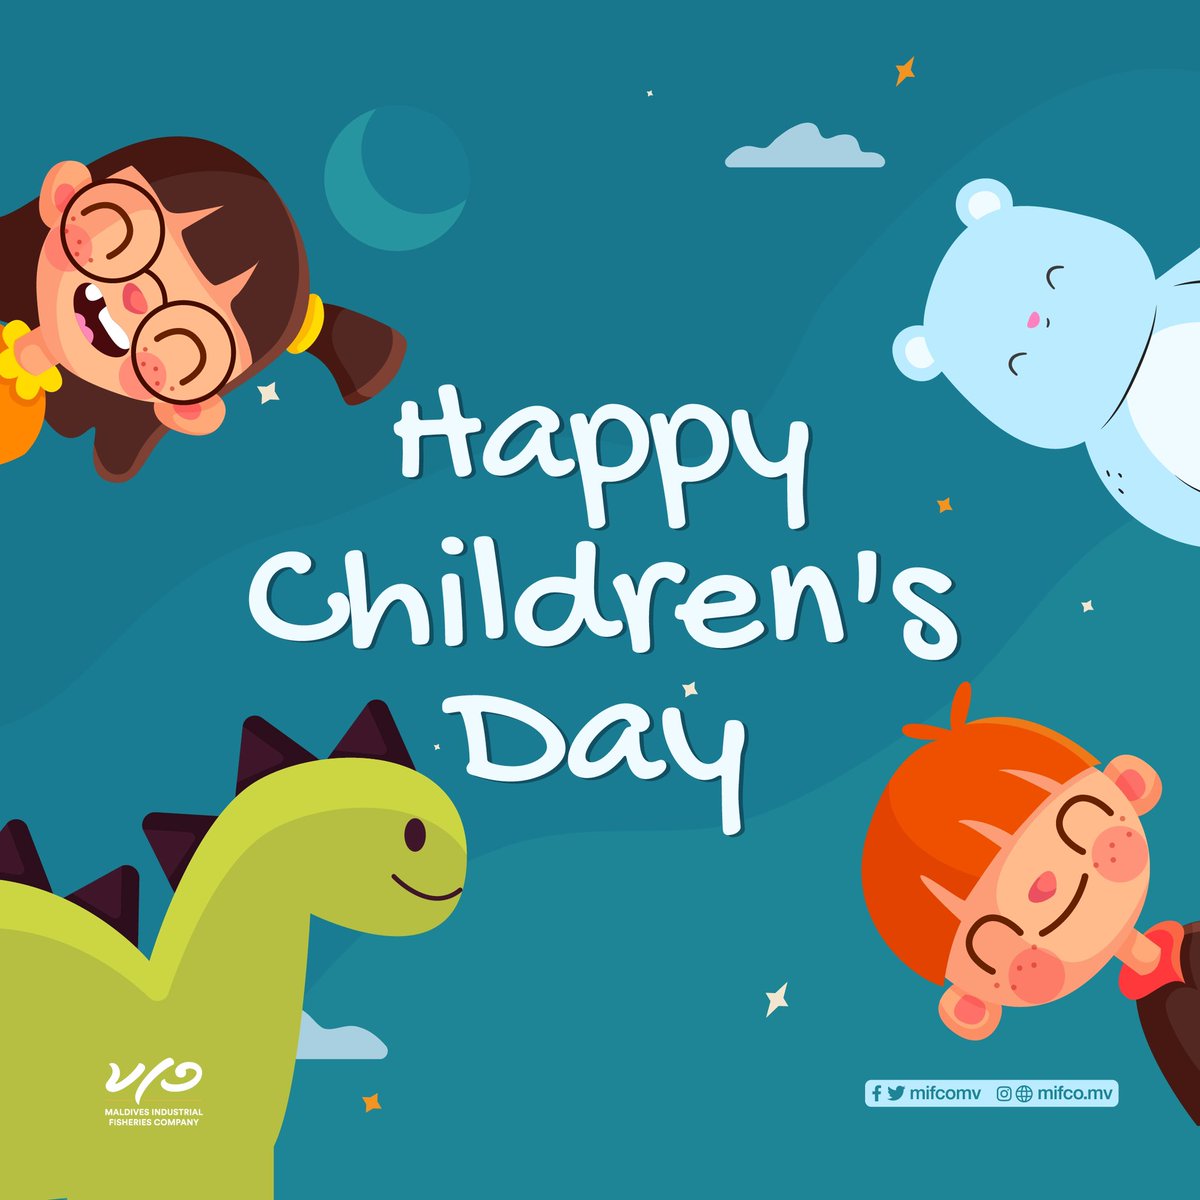 Happy Children’s Day! Let’s foster a nurturing world of joy, prosperity and health that brings a bright future for all Children. #TeamMifco #ChildrensDay